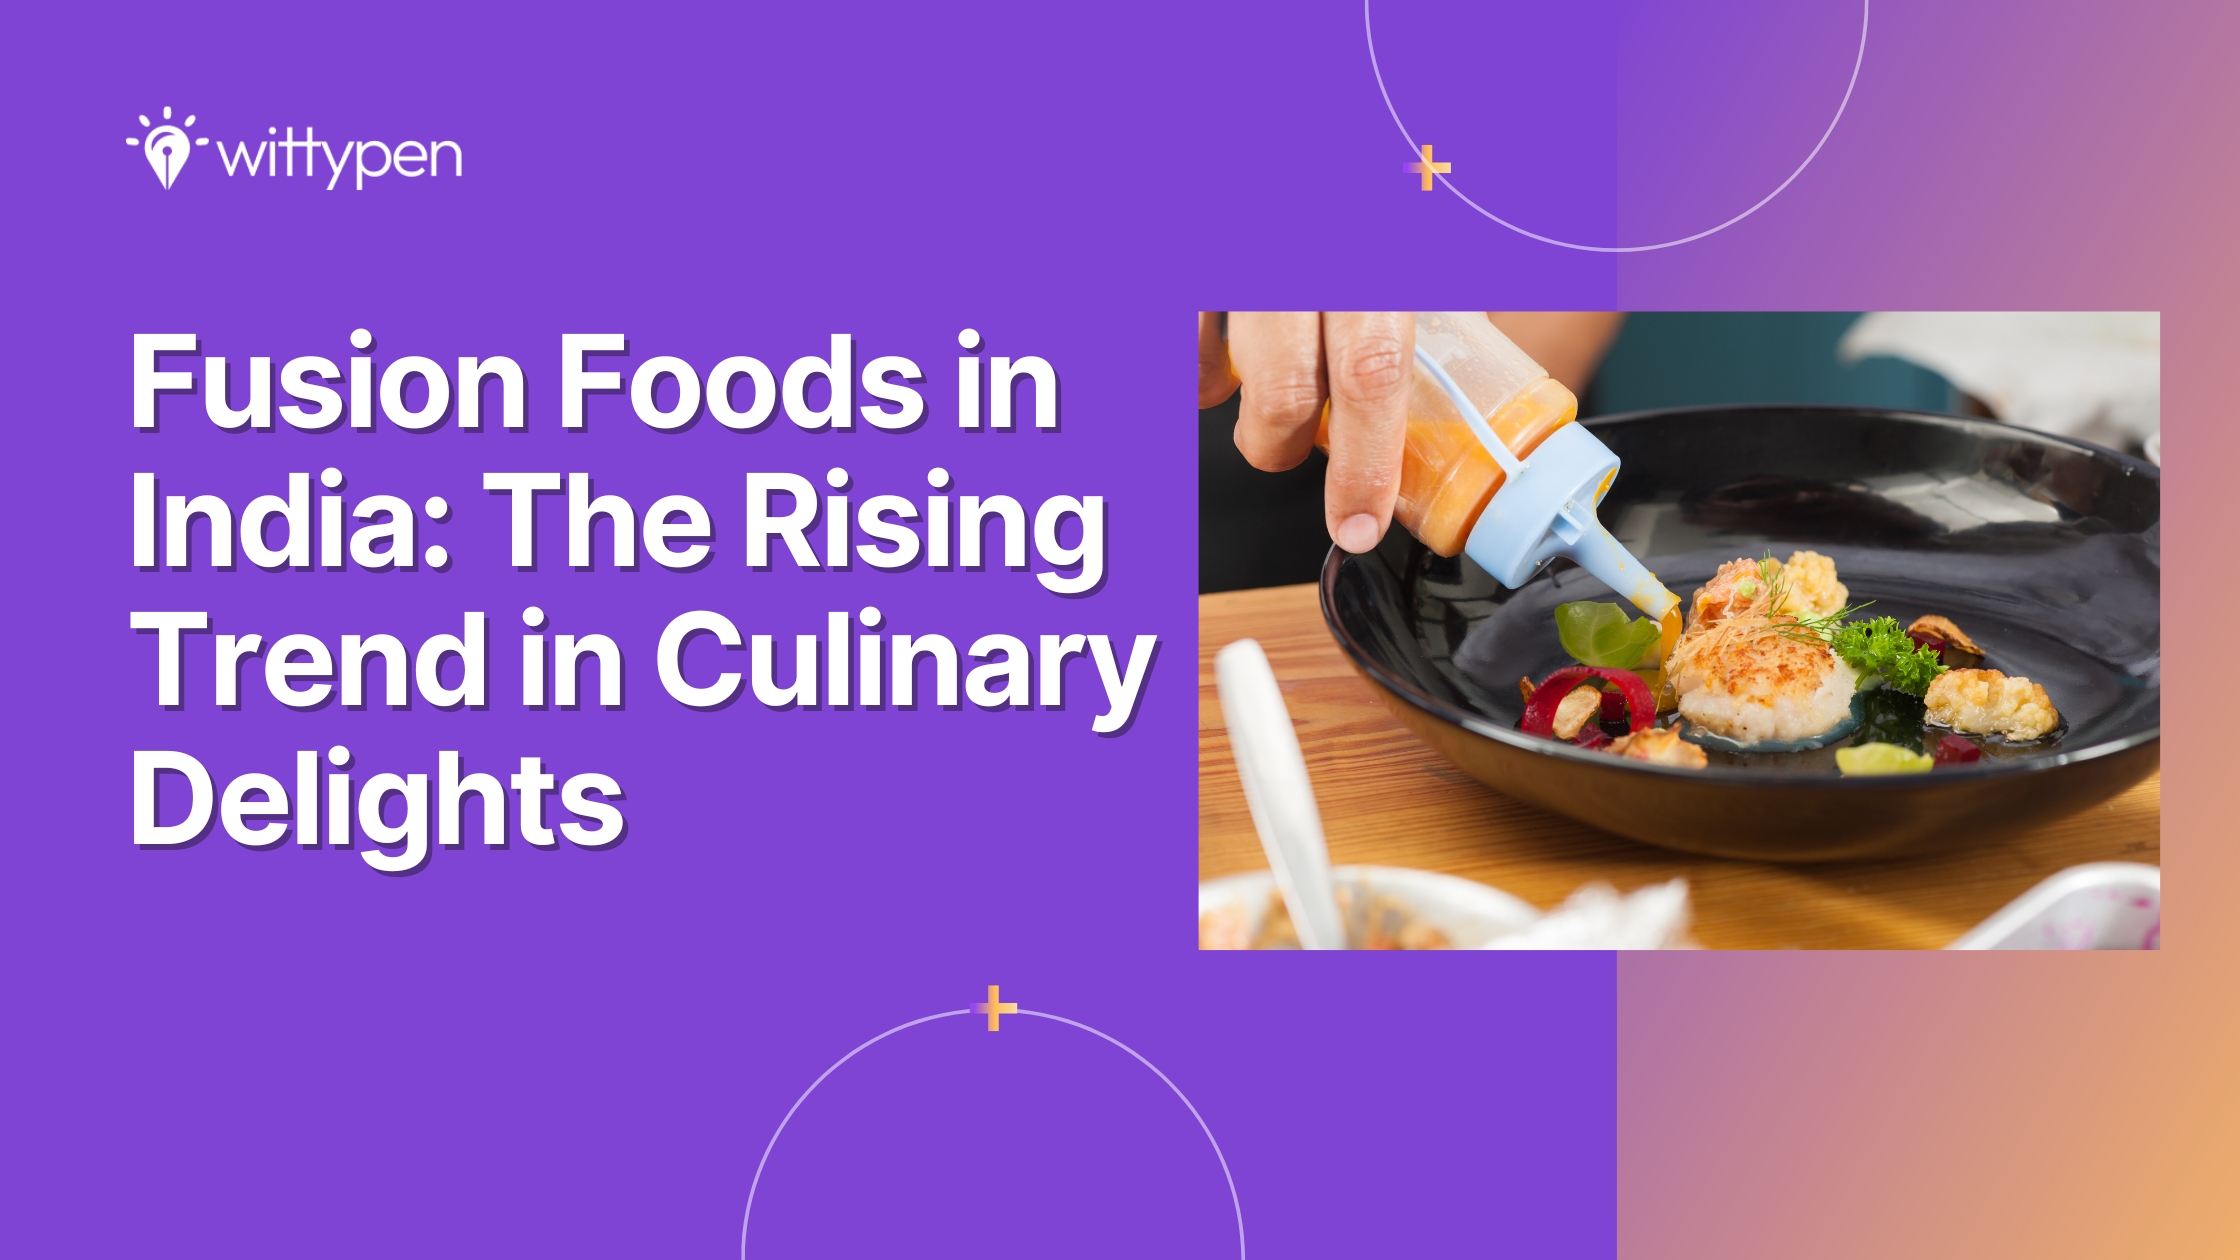 Fusion Foods in India: The Rising Trend in Culinary Delights